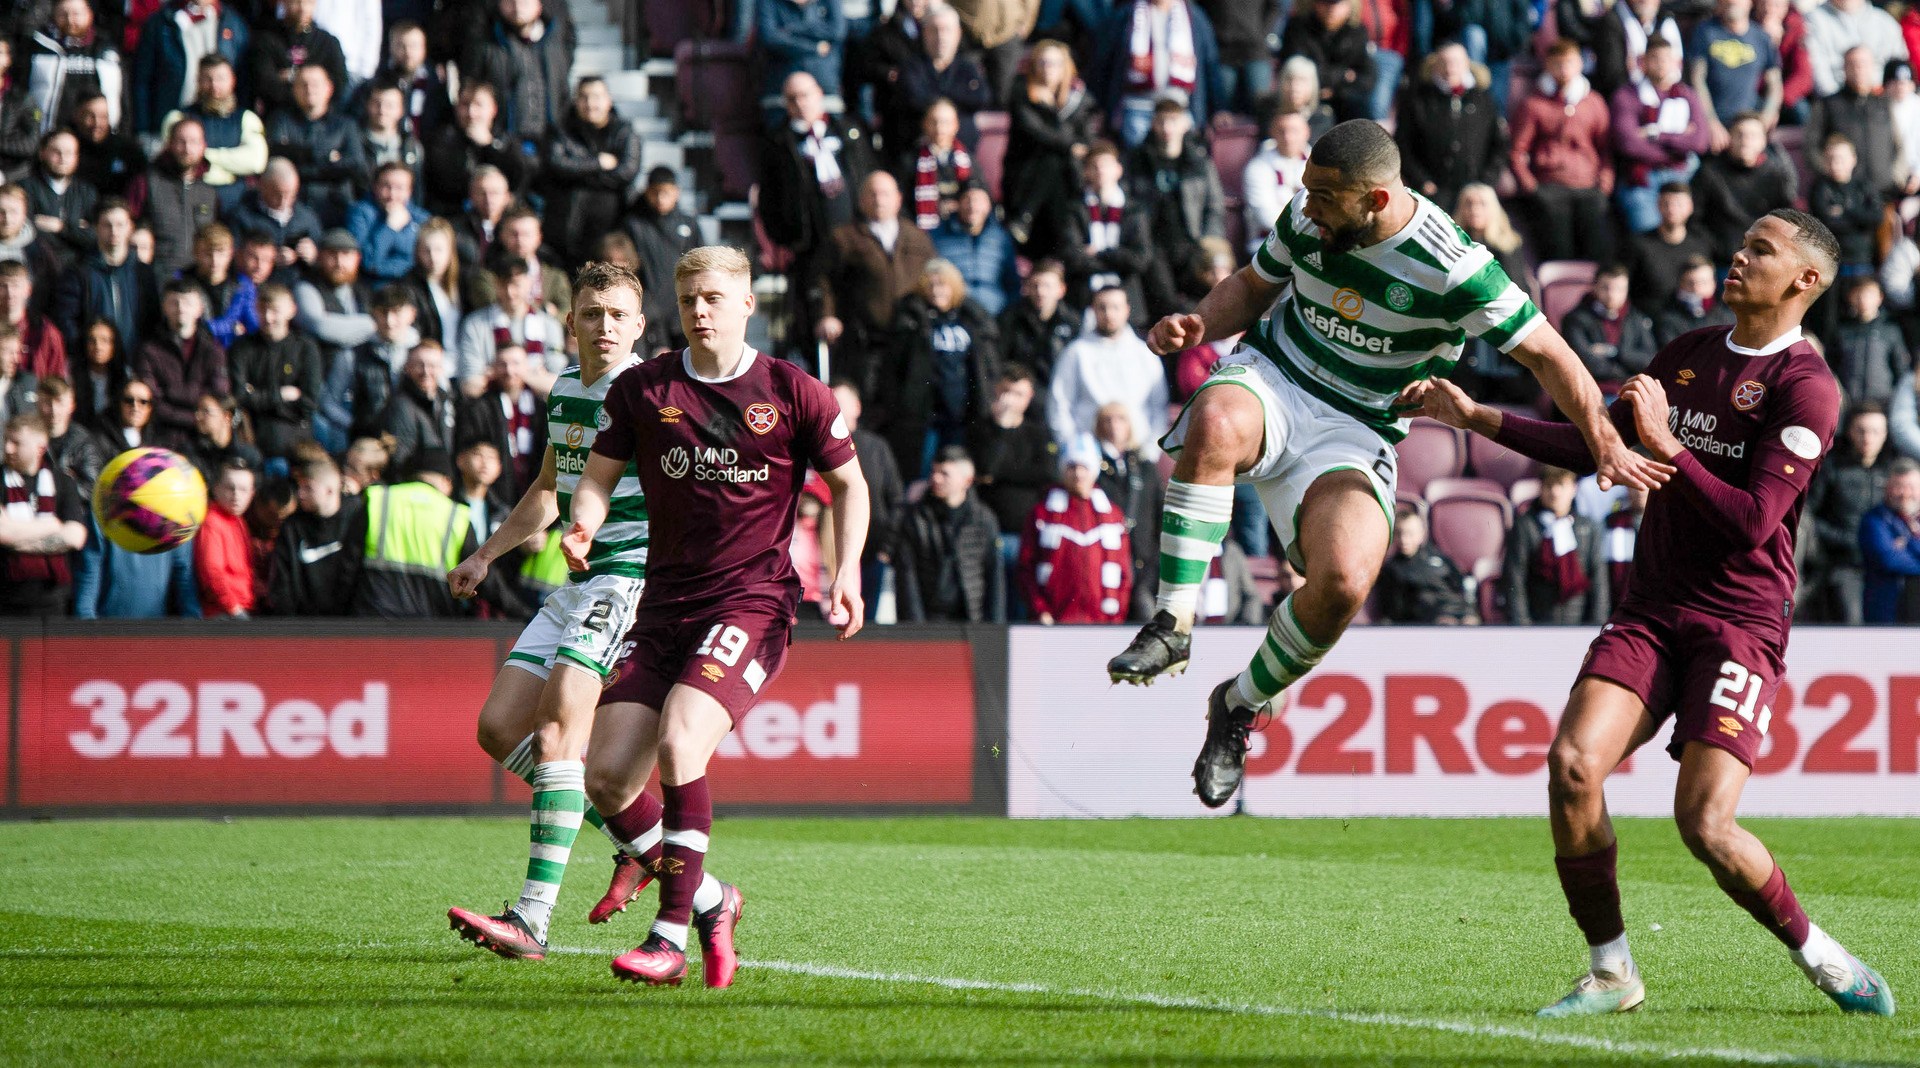 Celtic will be champions if they beat Hearts on Sunday. (Photo by Craig Foy / SNS Group)